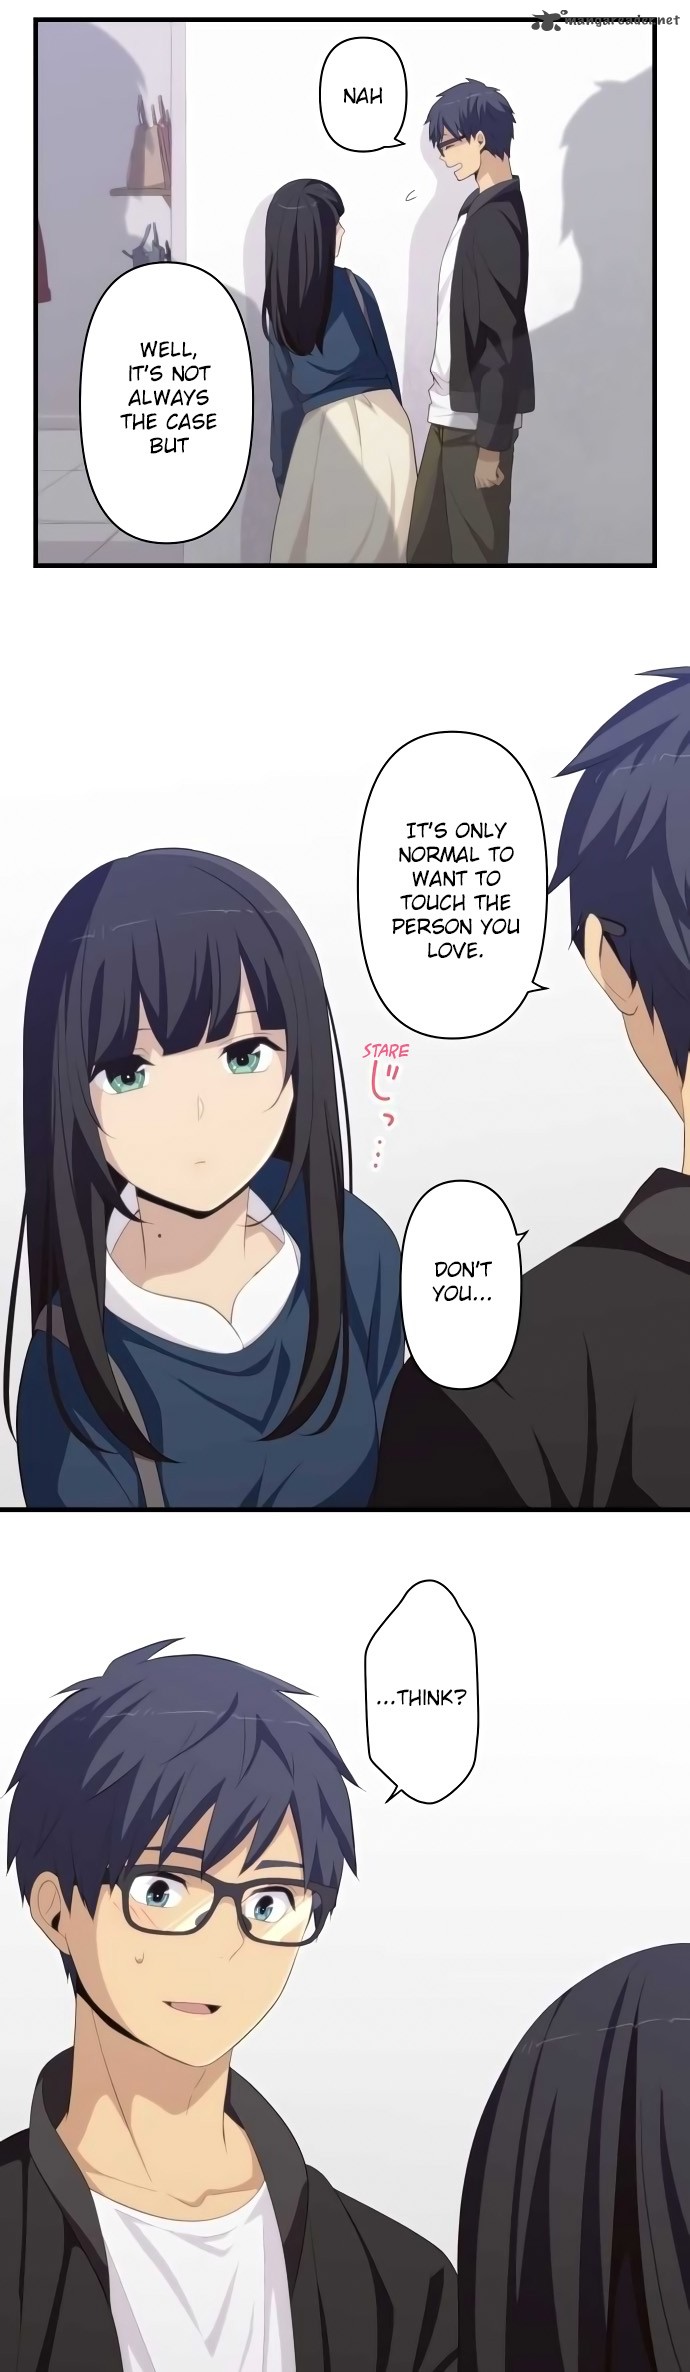 Relife 174 6